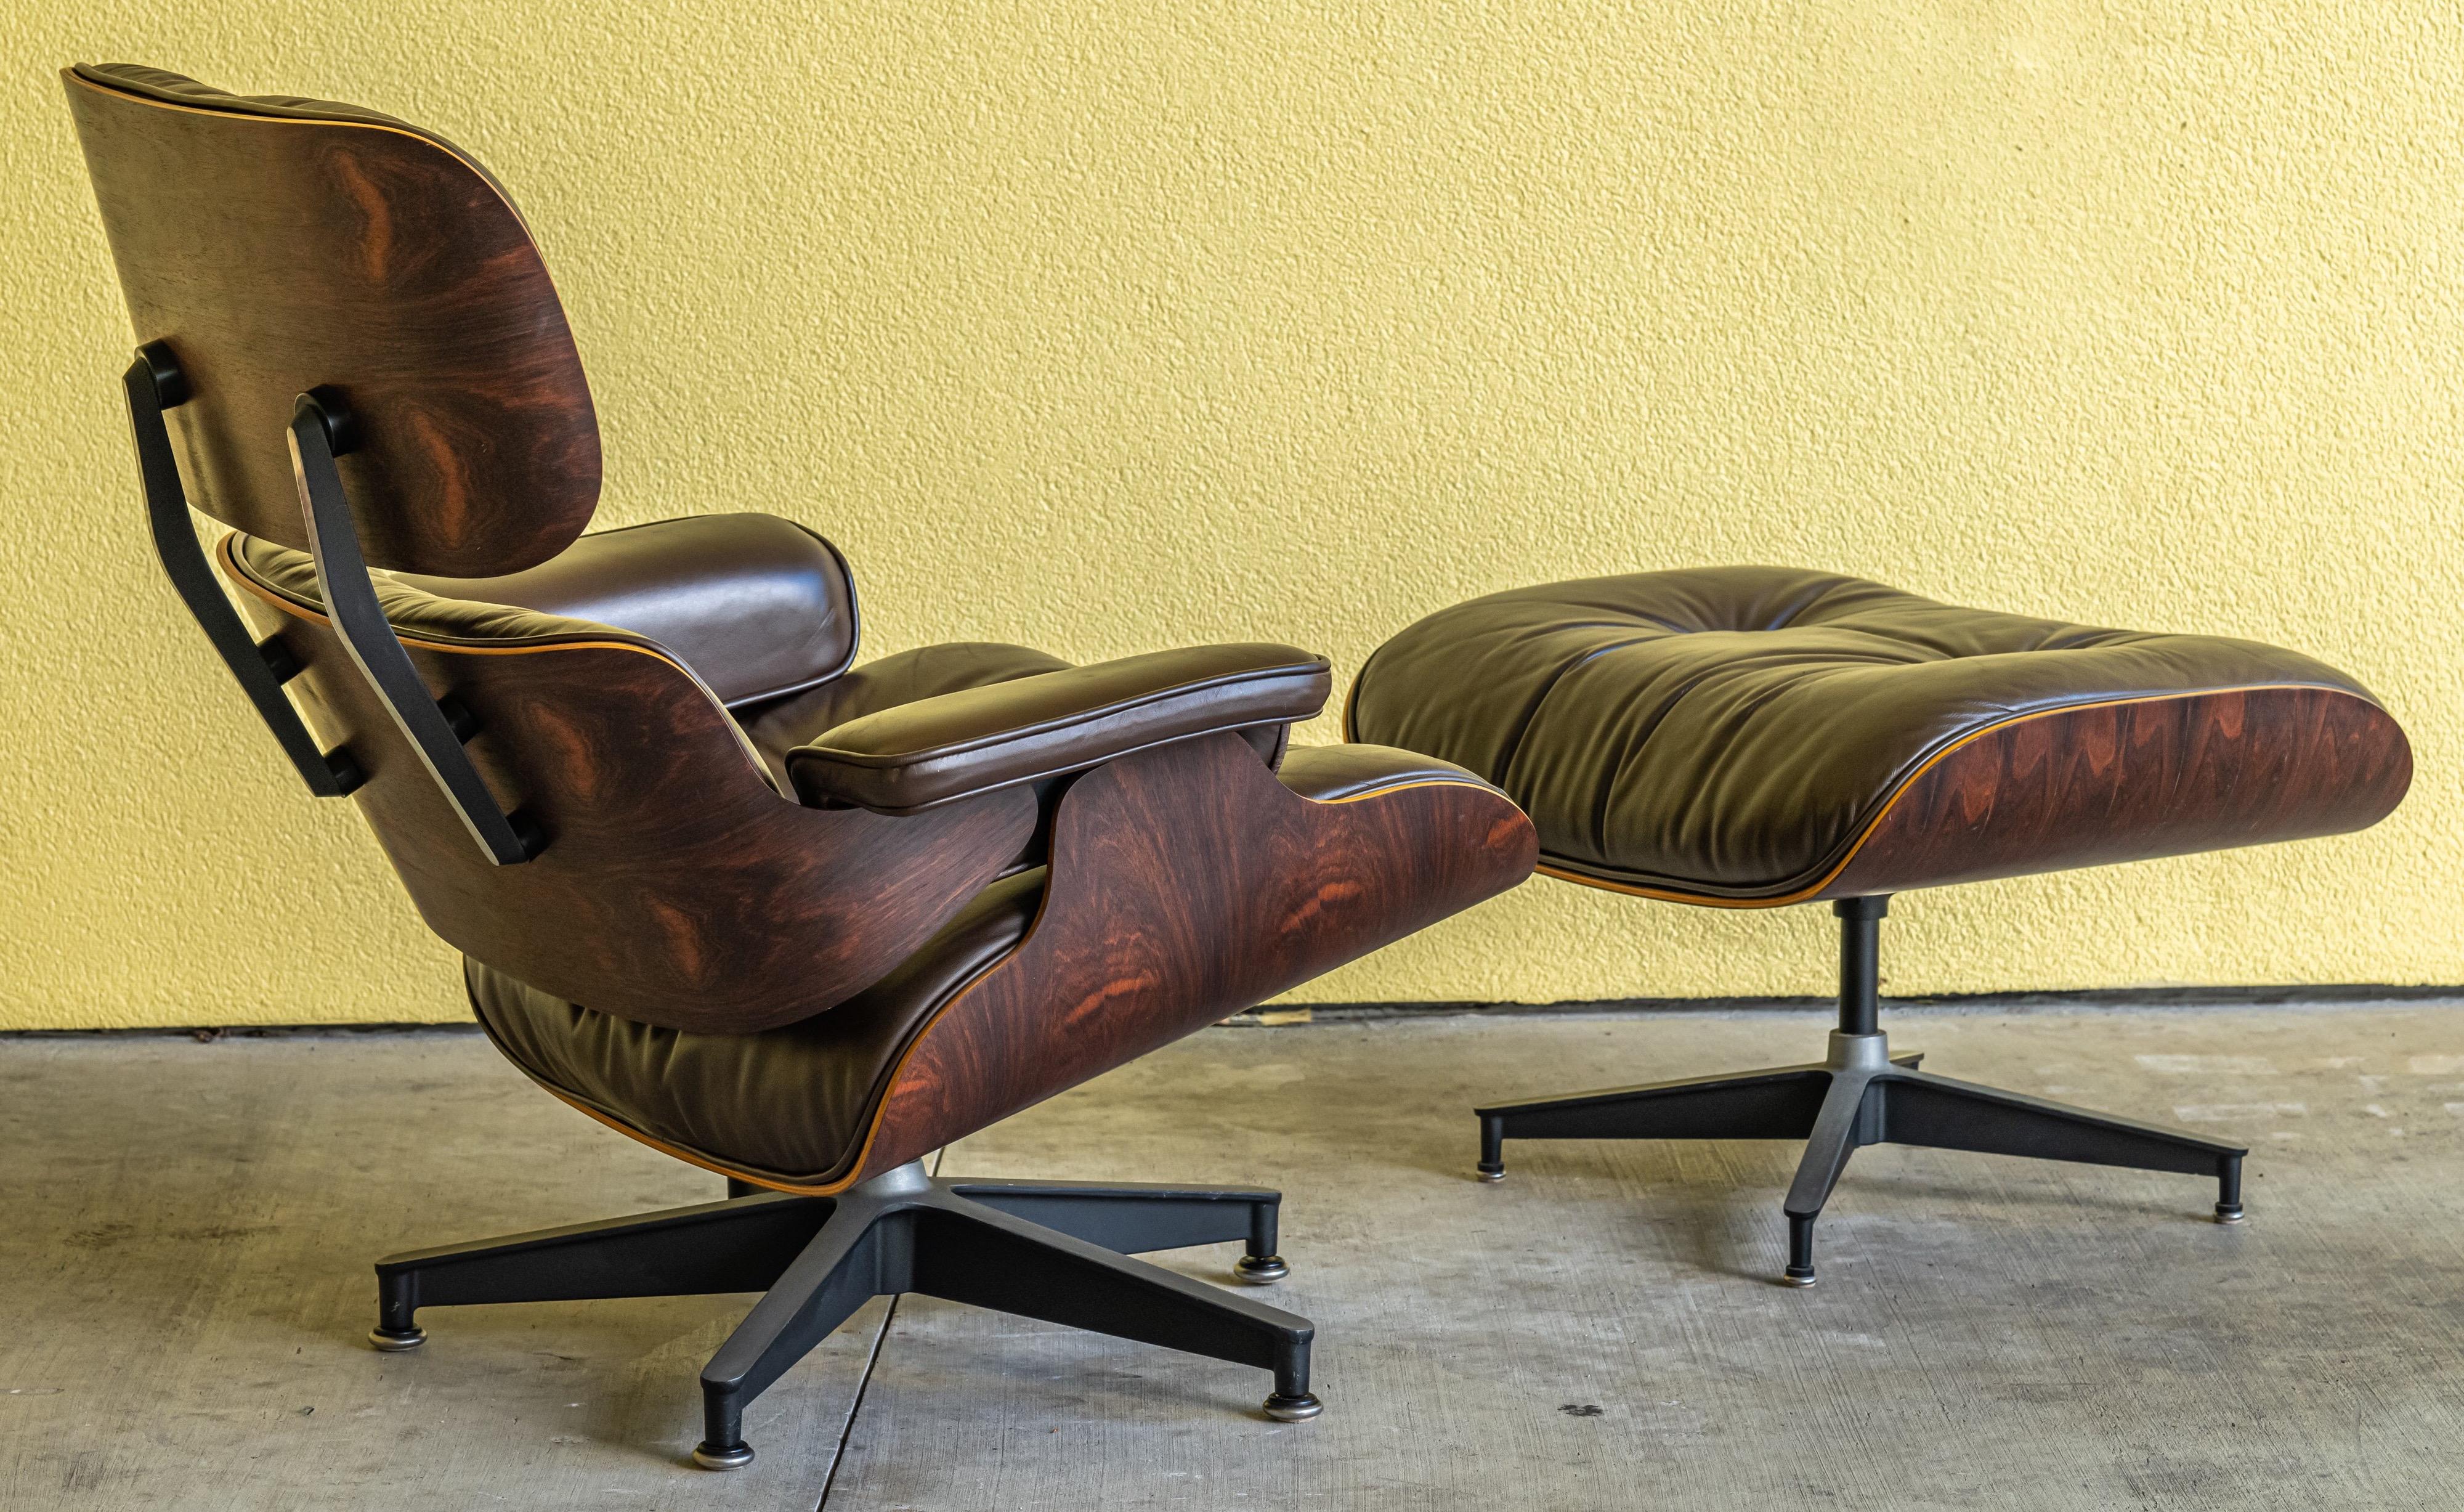 Charles Eames for Herman Miller lounge chair and ottoman. One owner. Original brown leather in very good condition with no tears, cracks or discolorations. Extraordinary pattern on the veneer on both pieces. All labels present.